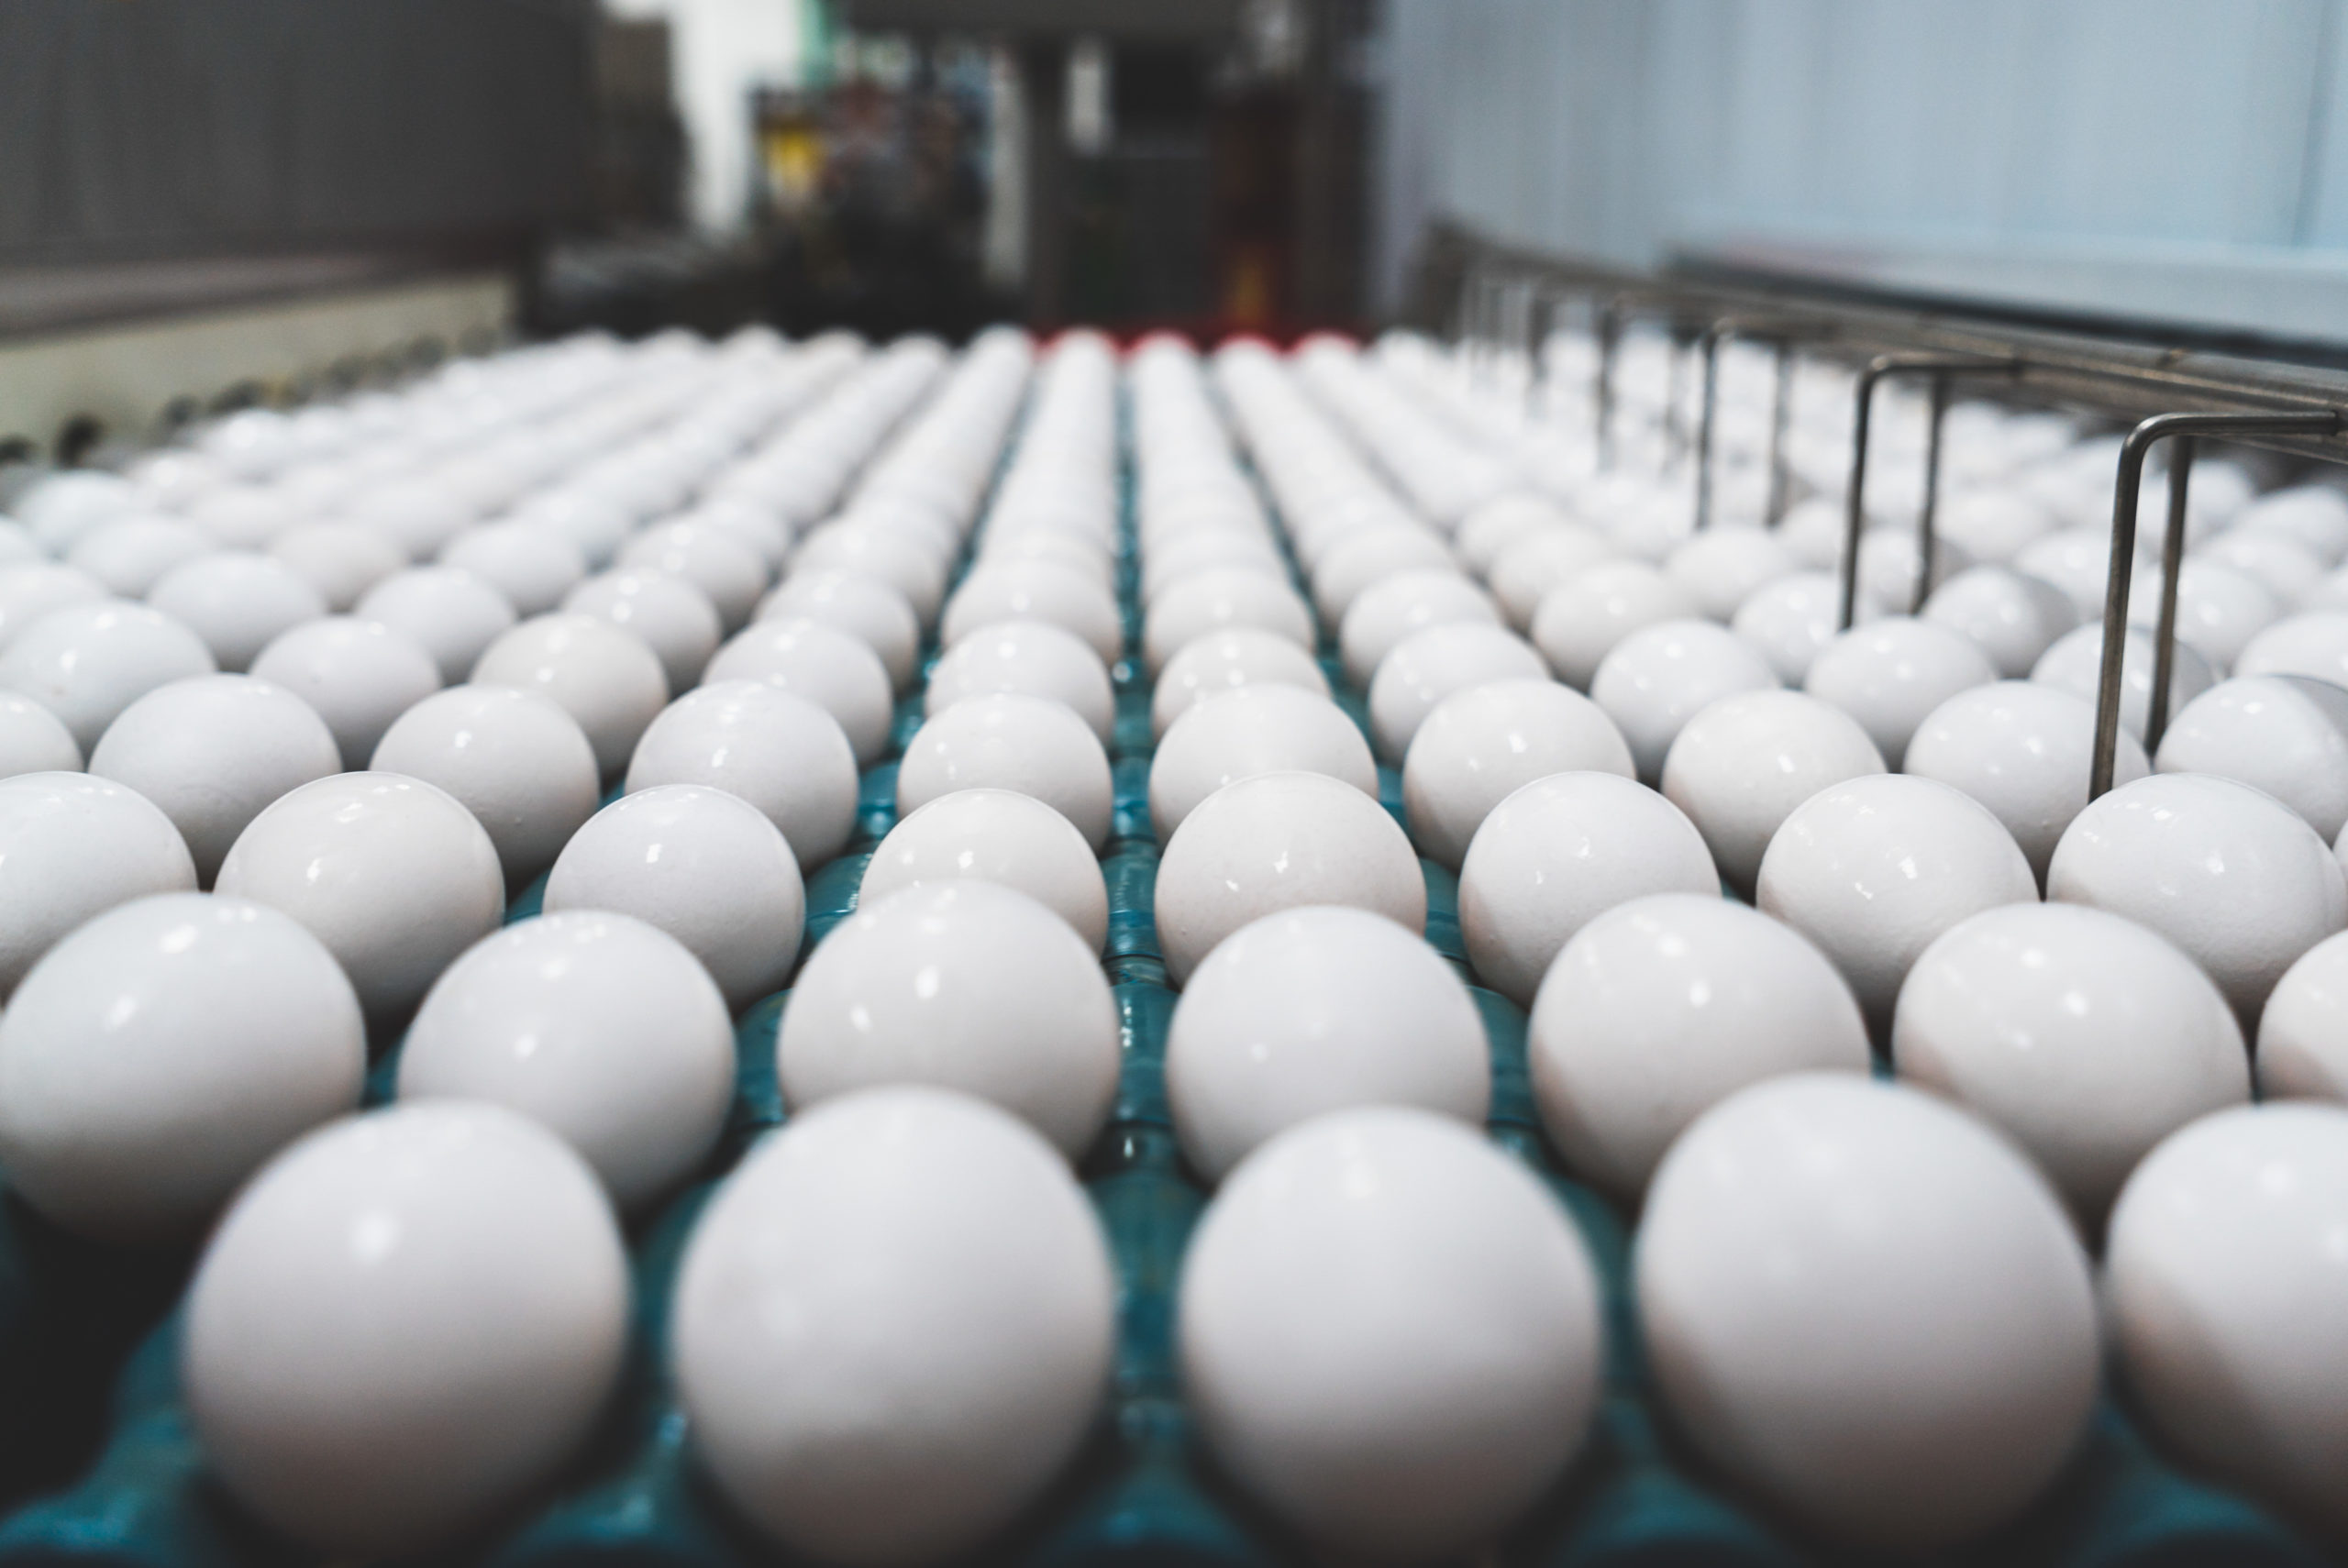 Employee care and a safe environment are top priorities on egg farms